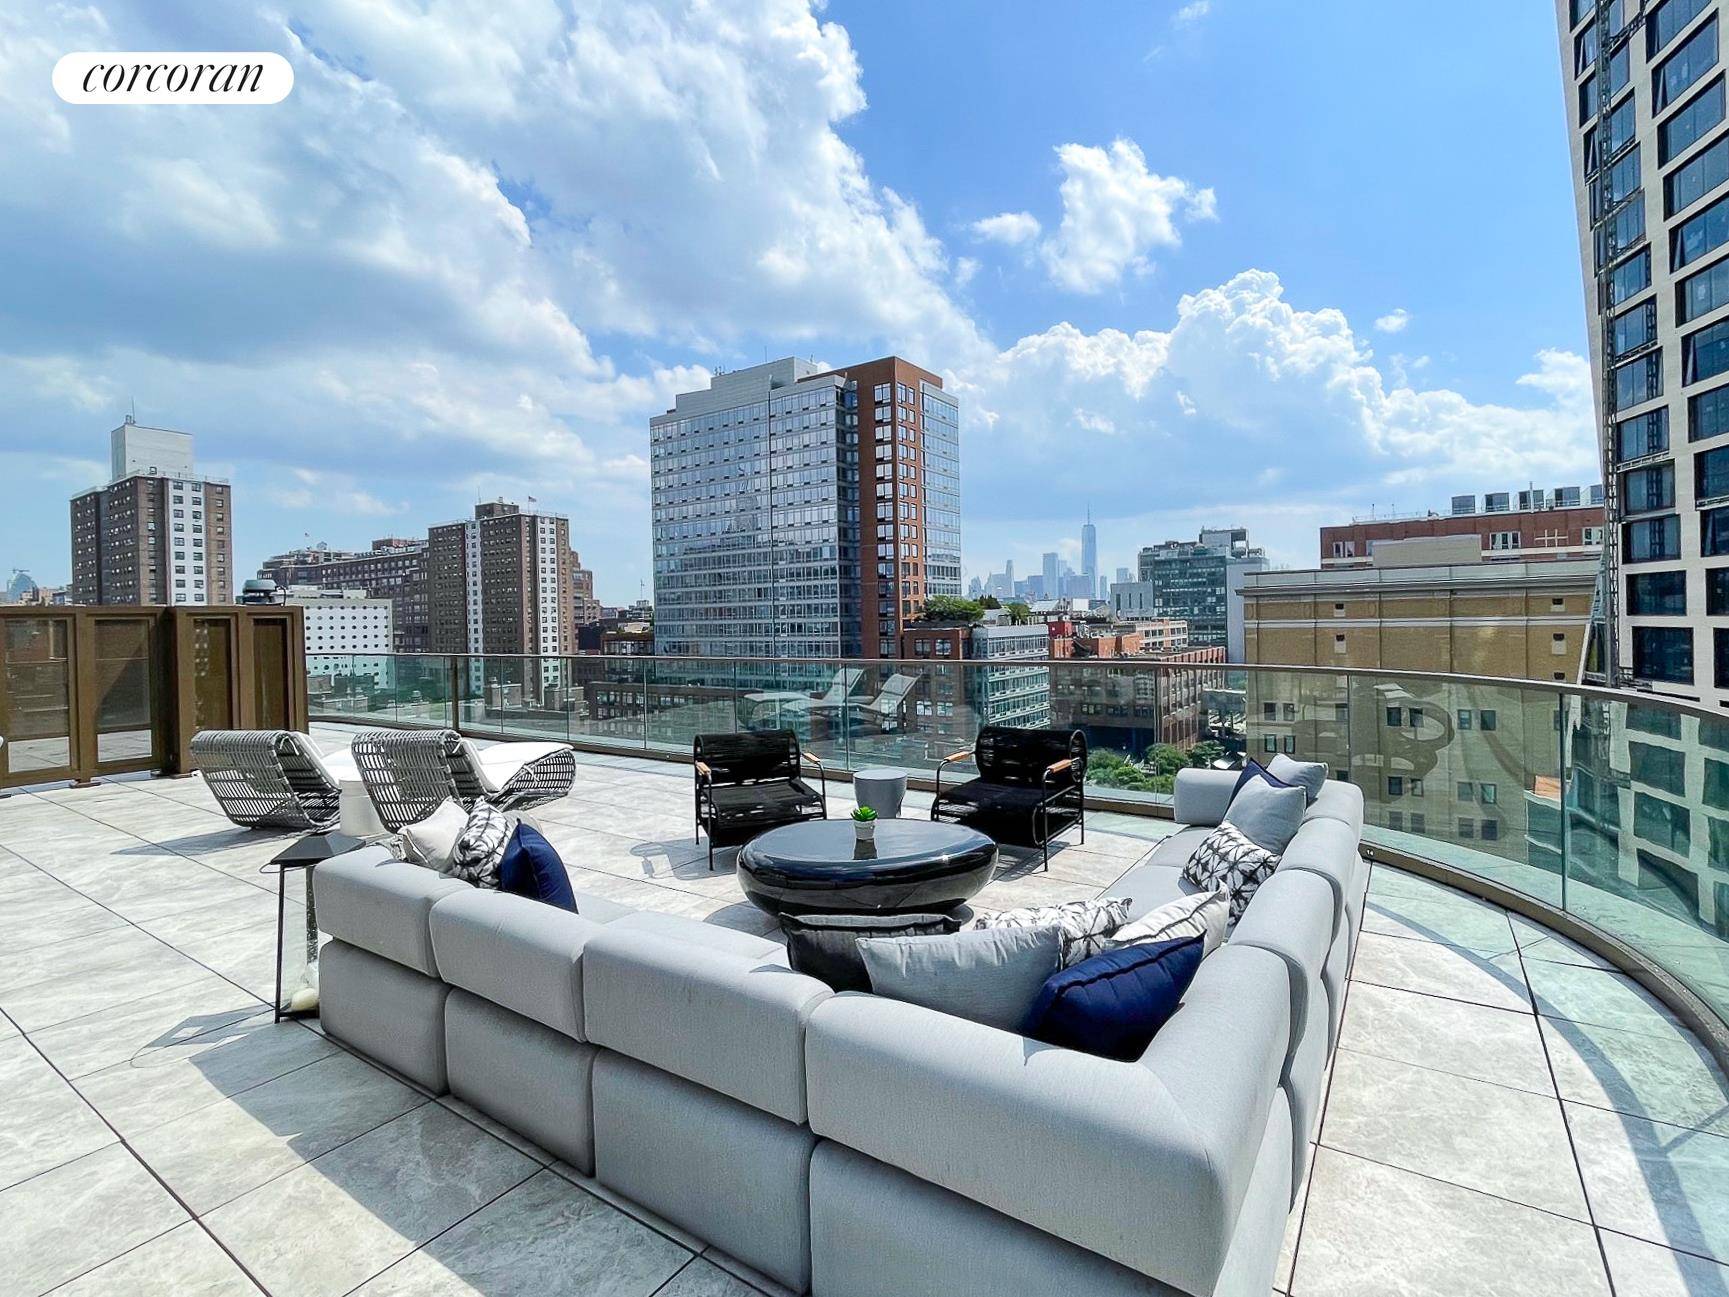 BIG, BEAUTIFUL 3 BEDROOM PENTHOUSE WITH HUDSON RIVER VIEWS FROM ITS SIX HUGE BAY WINDOWS AND AMAZING 40 FOOT BY 19.